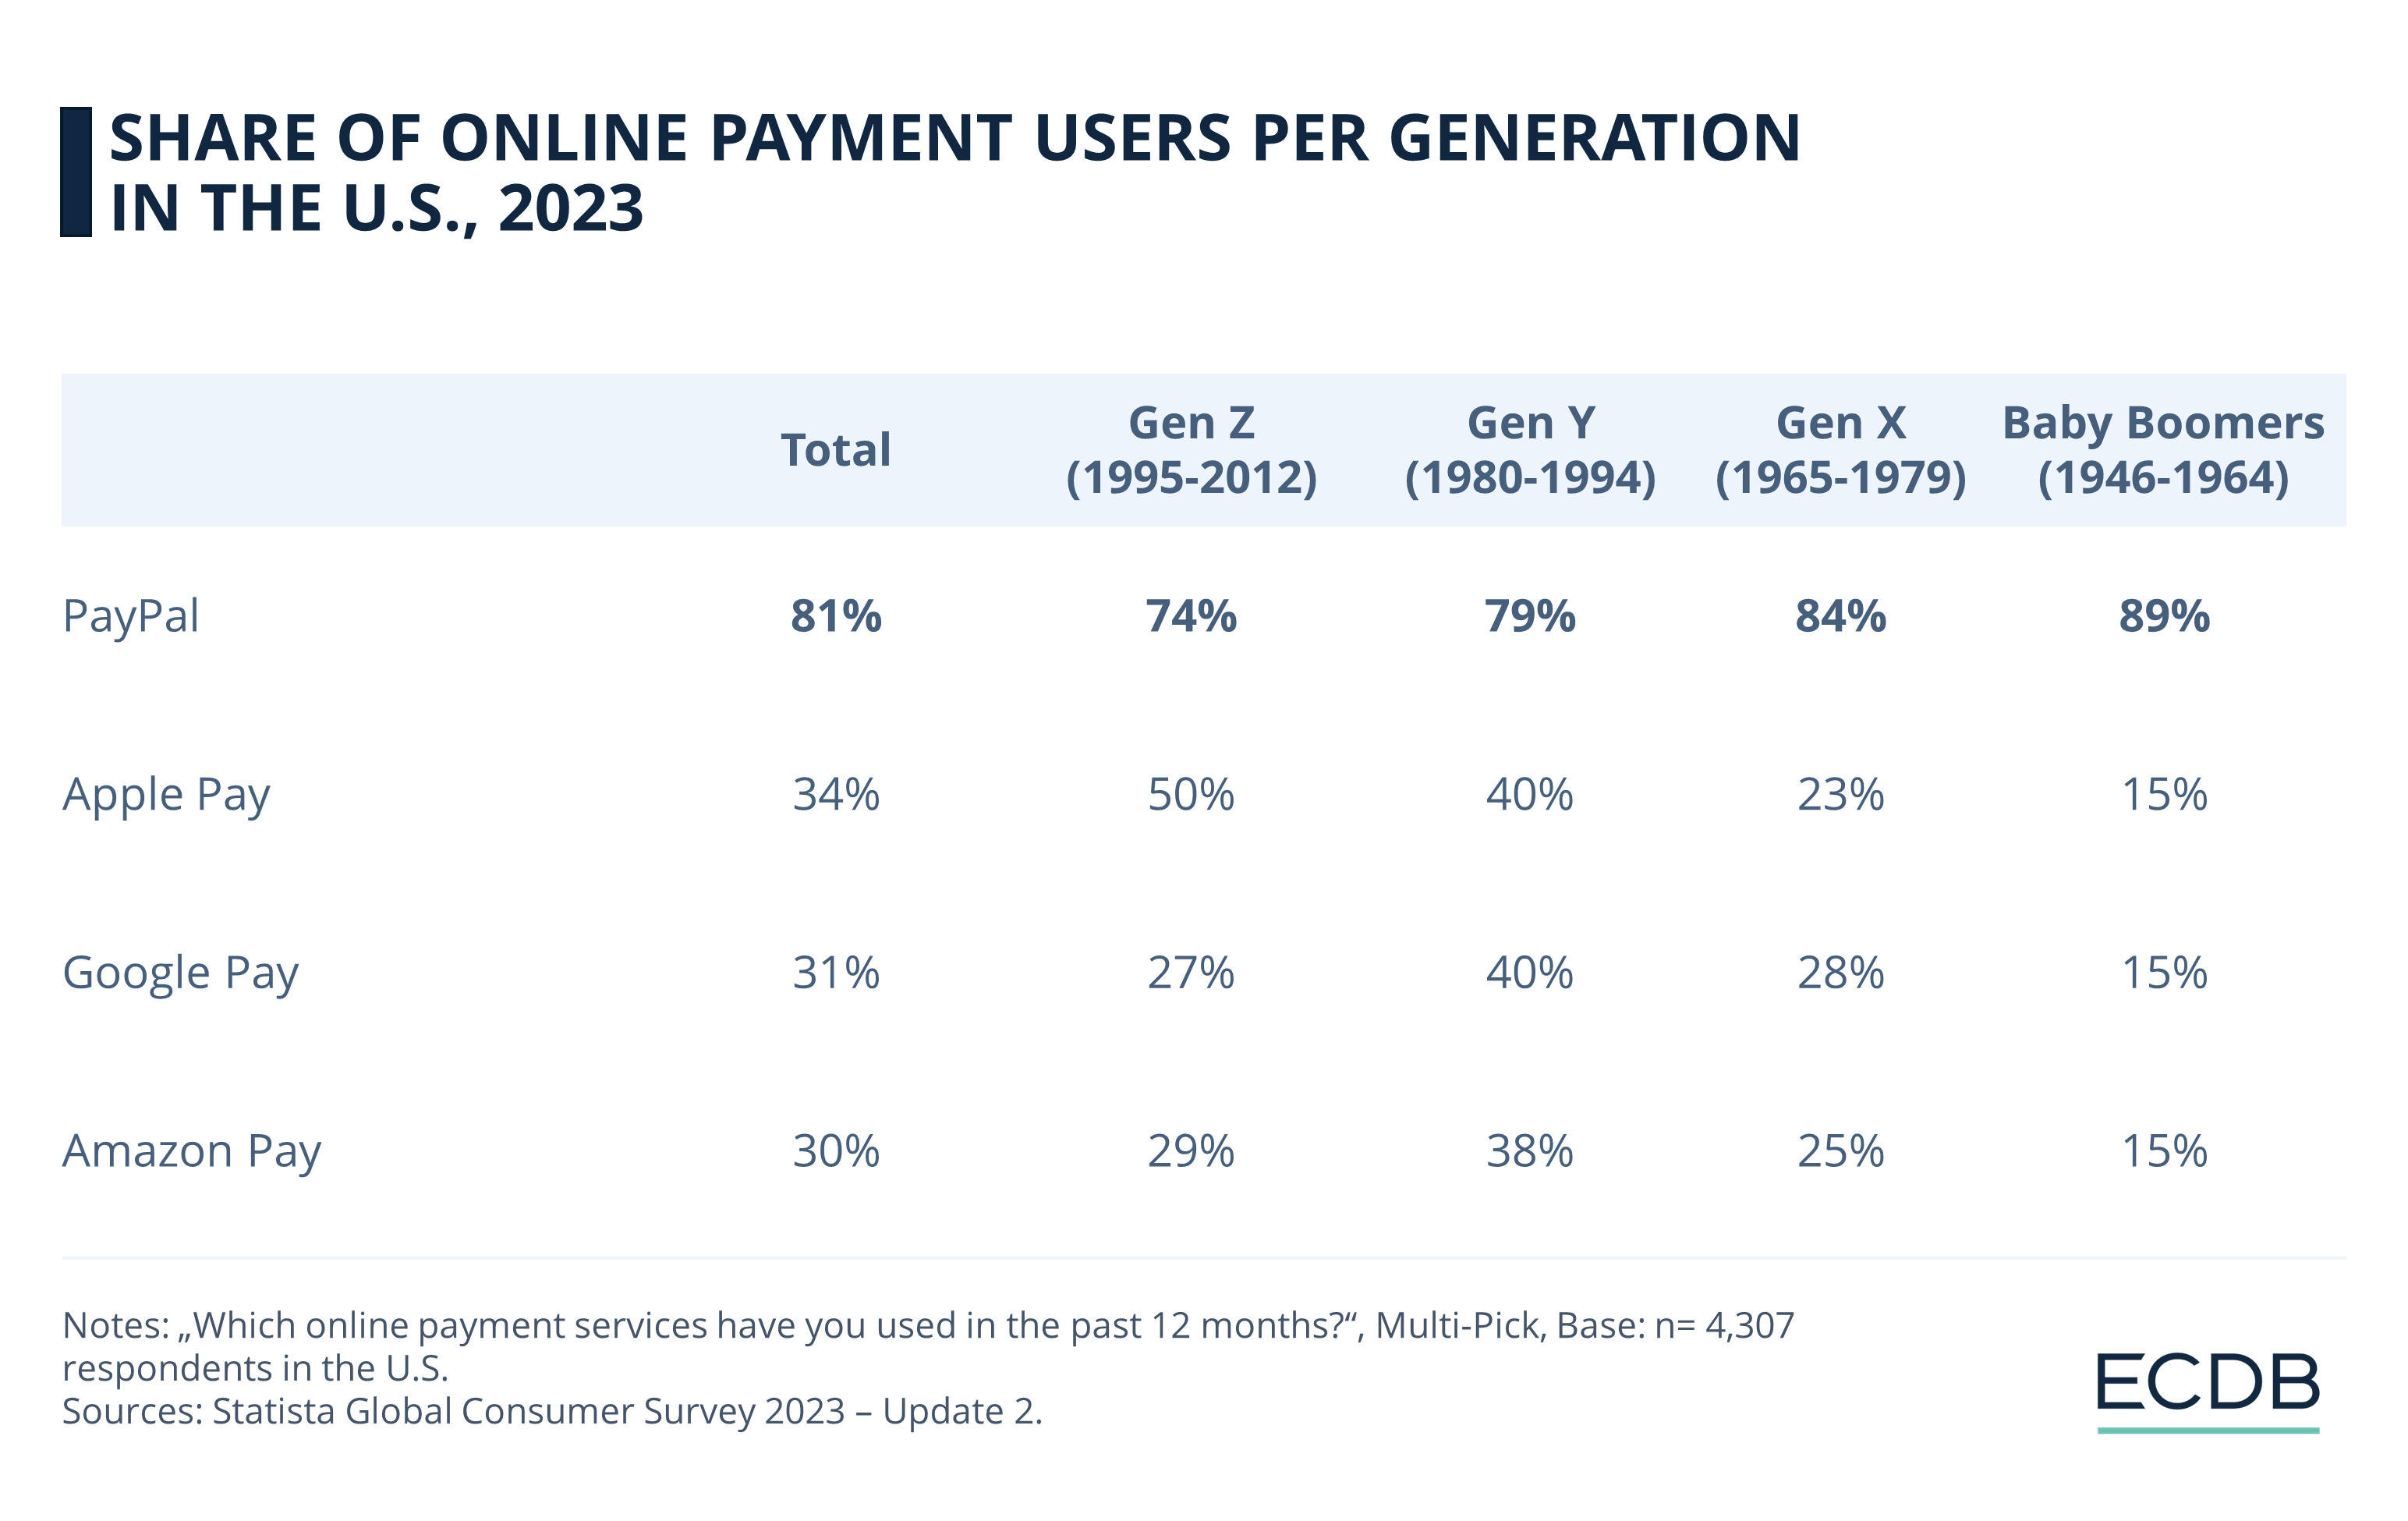 Share of Online Payment Users per Generation in the U.S., 2023